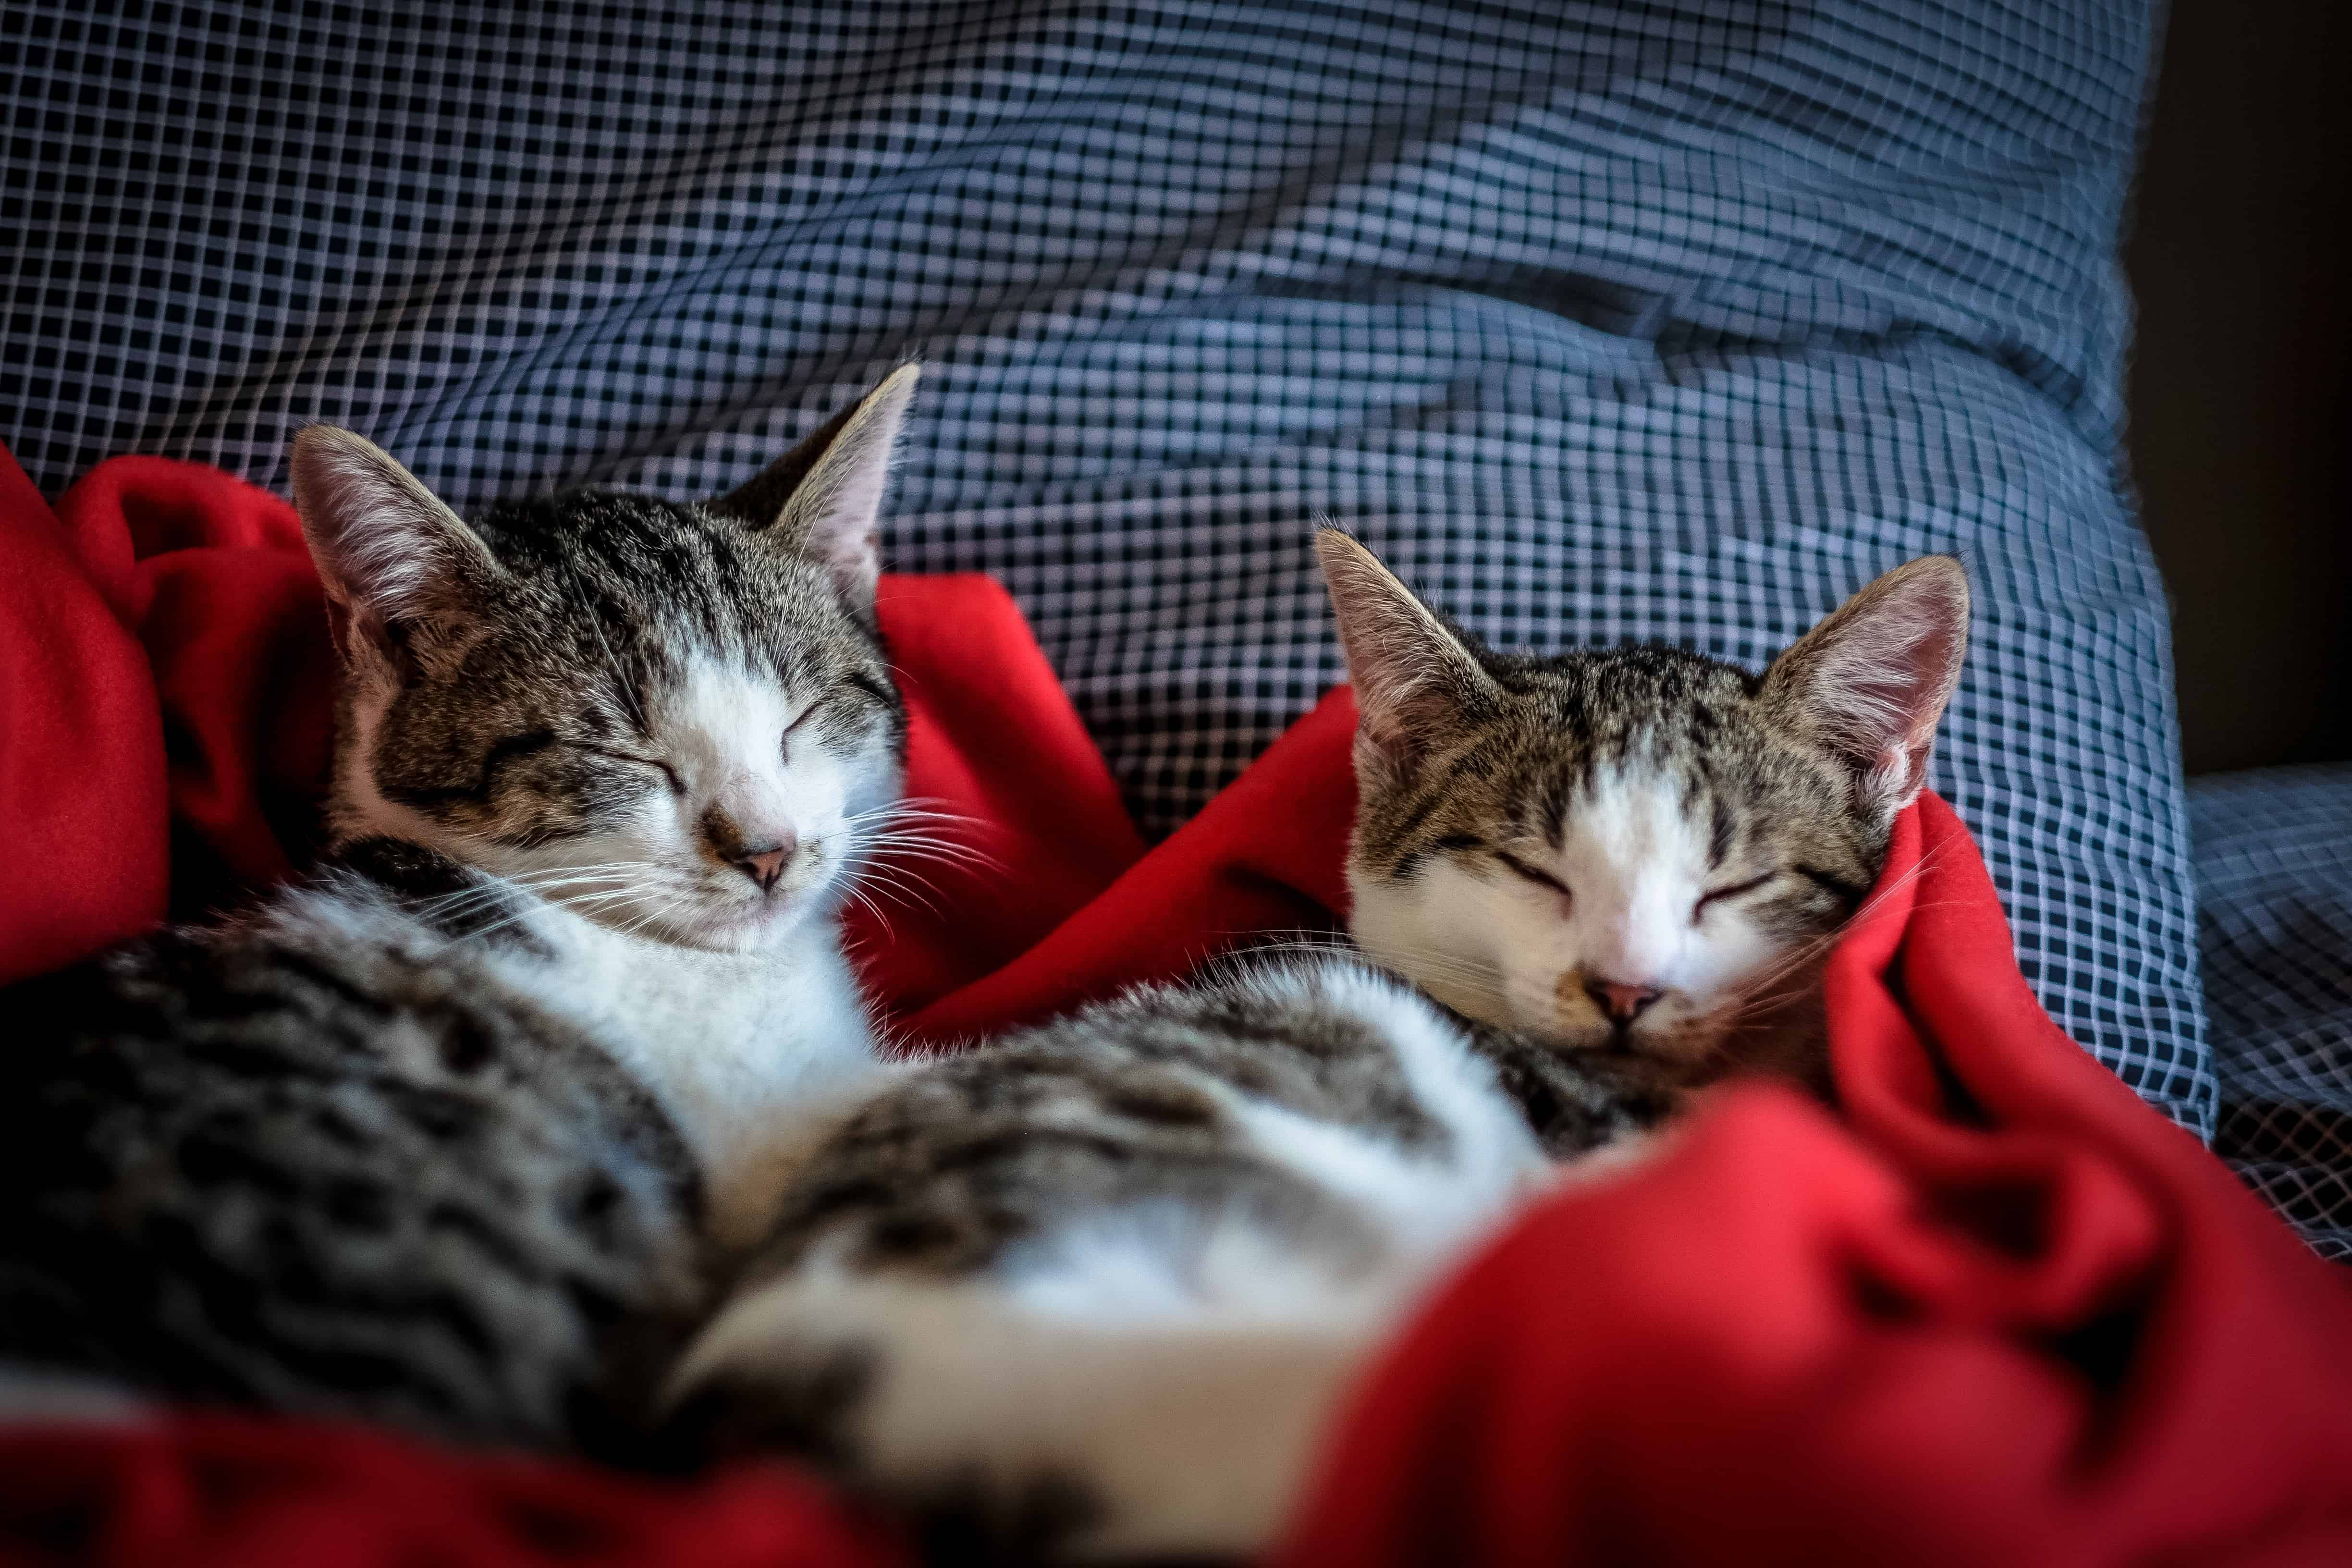 cats sleeping on a red blanket